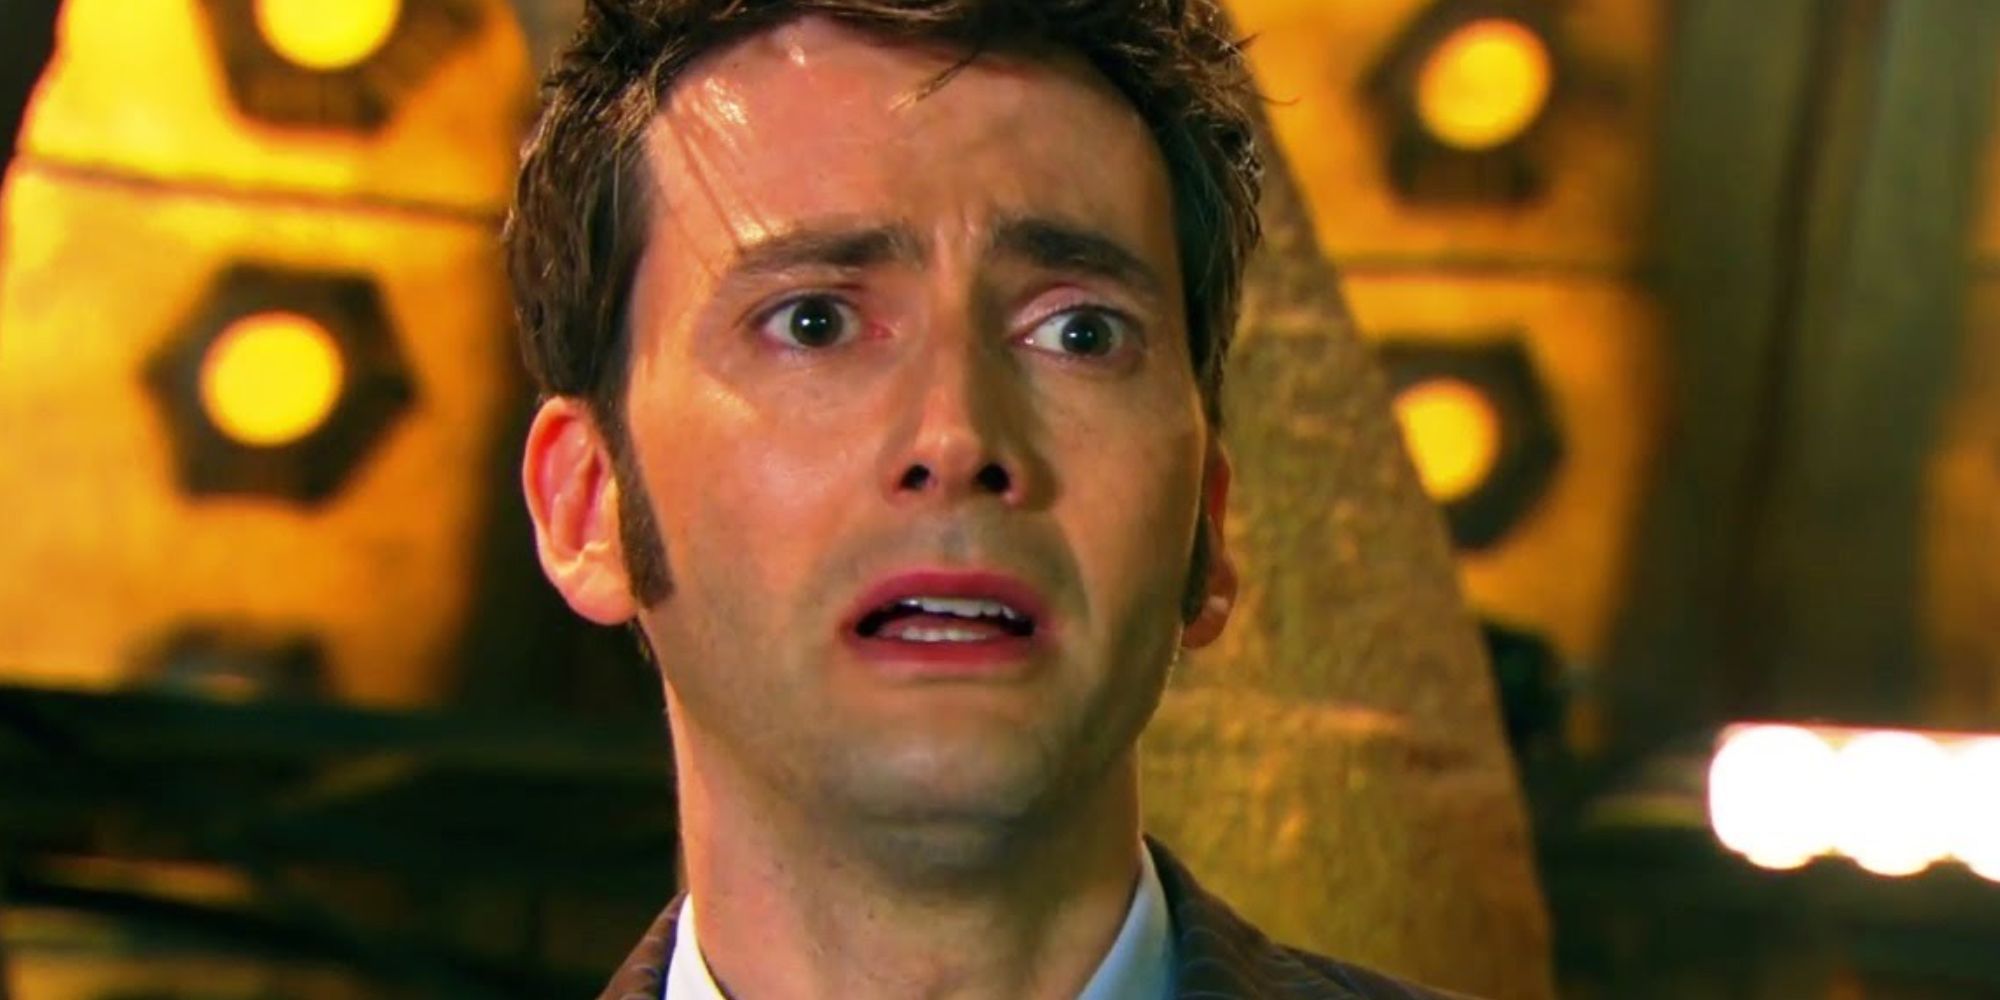 David Tennant looking sad as the Tenth Doctor just before his Doctor Who regeneration scene.